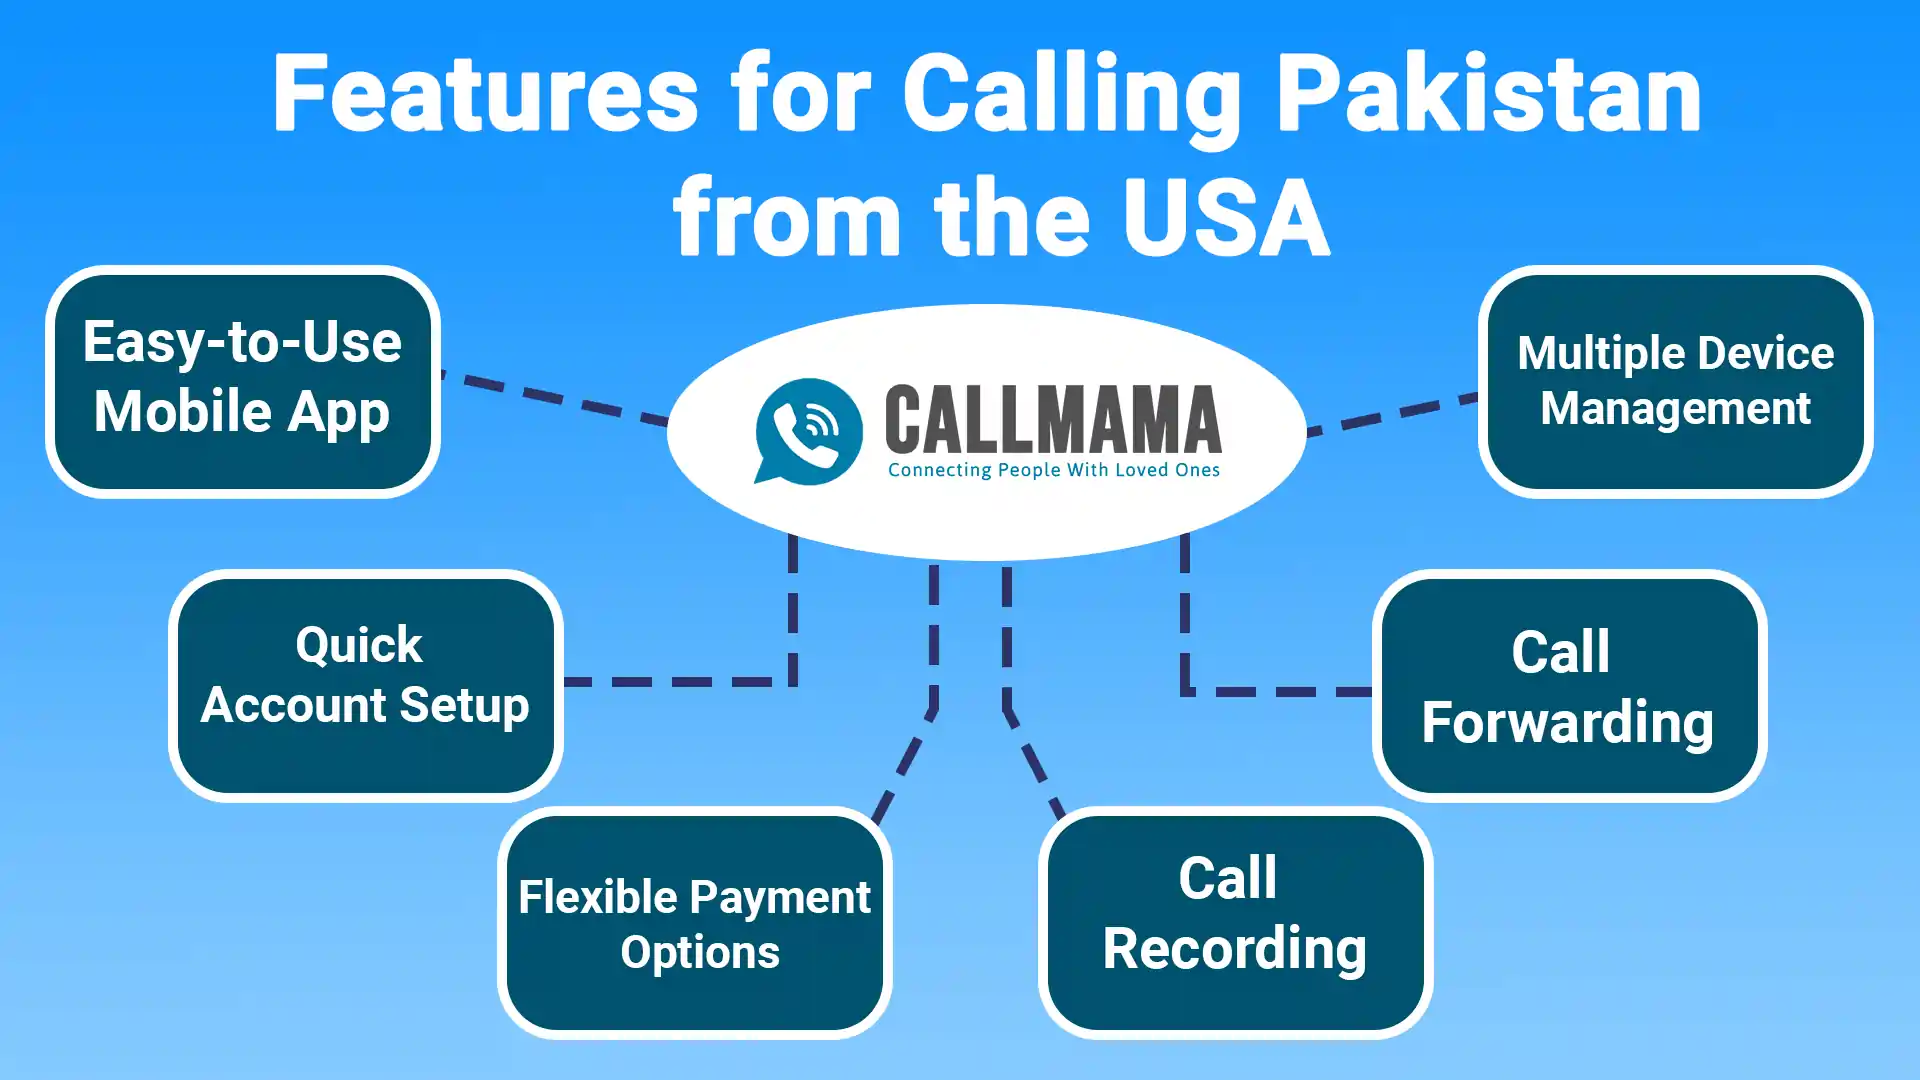 Callmama Features for Calling Pakistan from the USA